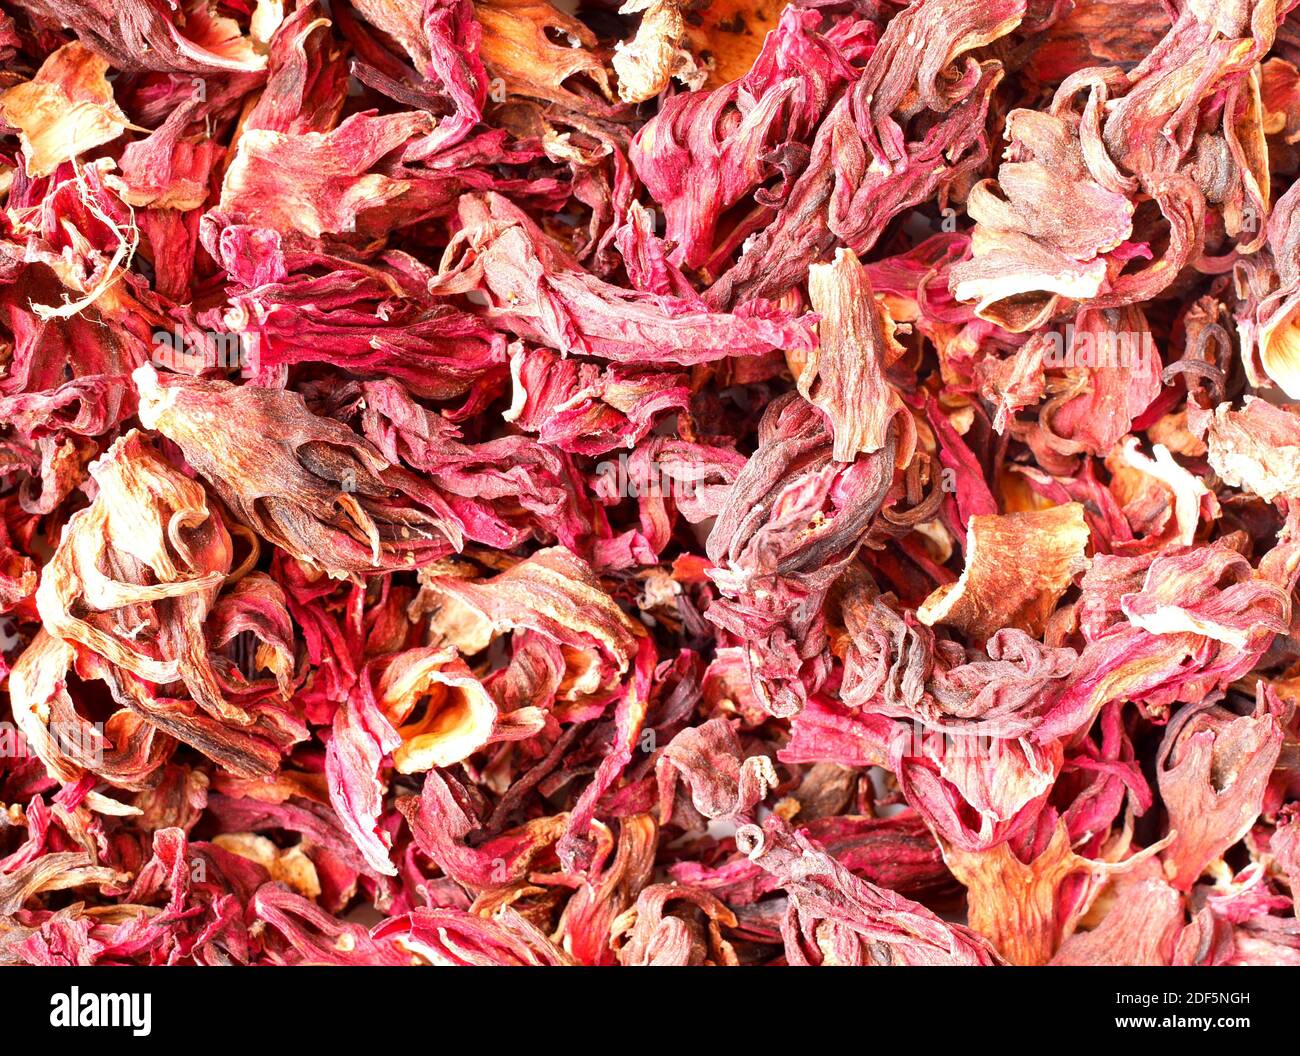 Dried hibiscus  calyces, used medicinally and for cooking and making tea Stock Photo